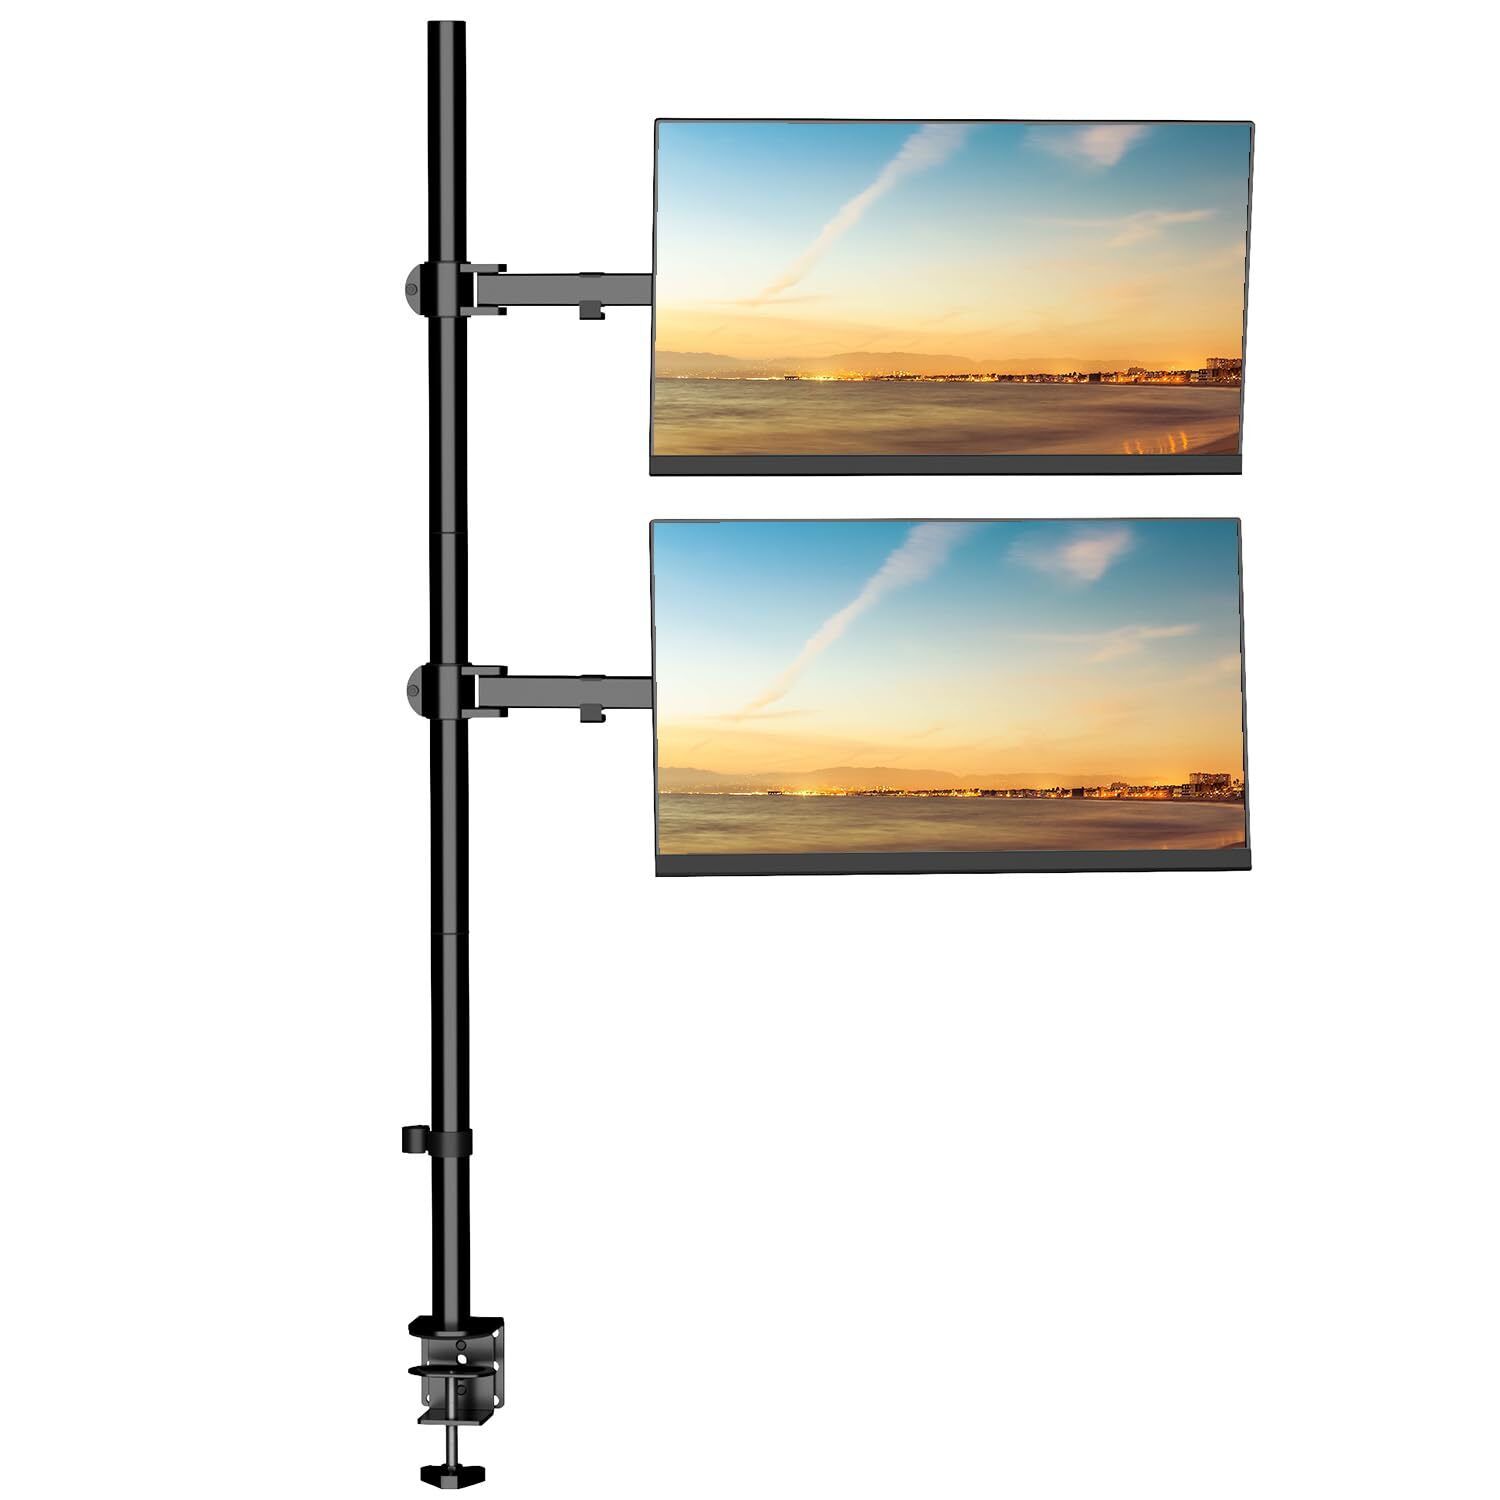 WALI Dual Vertically Stacked Monitor Desk Mount Extra Tall Adjustable Stand f...